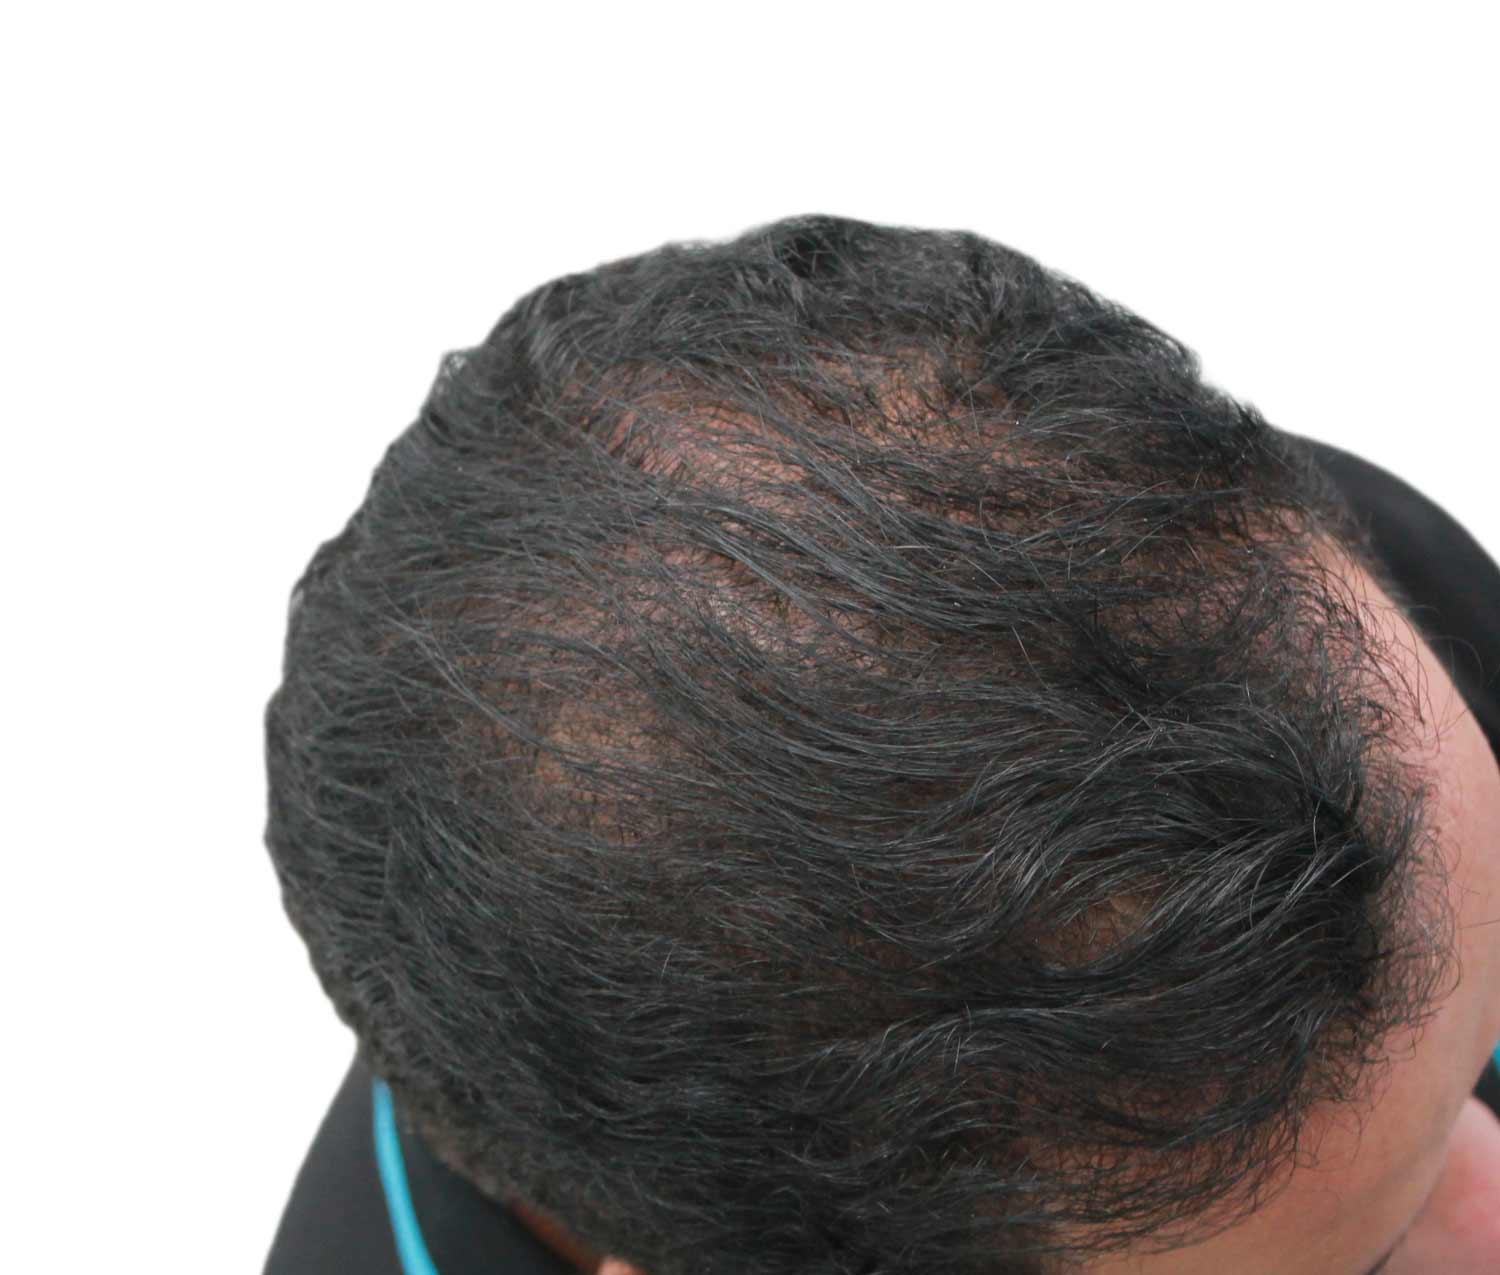 After hair restoration | Real patient, results may vary per individual